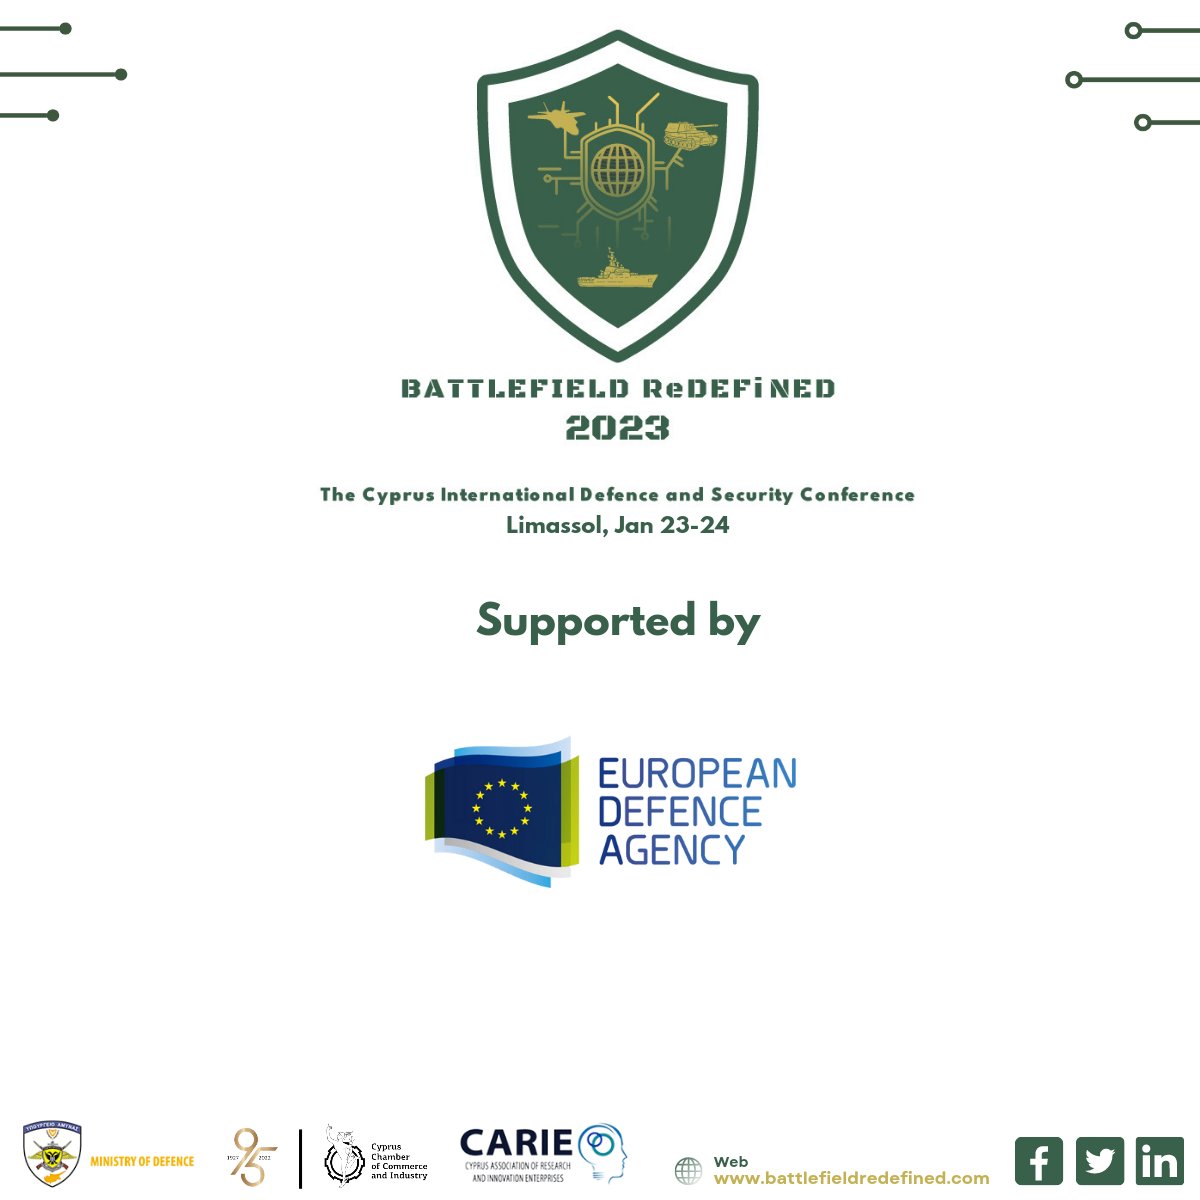 We proudly announce that the #EDA is a supporter of the upcoming #Conference. Emerging #disruptivetechnologies and the possibilities of developing a strong #Defence, #Security & #Space industrial base in Cyprus are among the thematics of our event. More: 
defenceredefined.com.cy/battlefield-re…